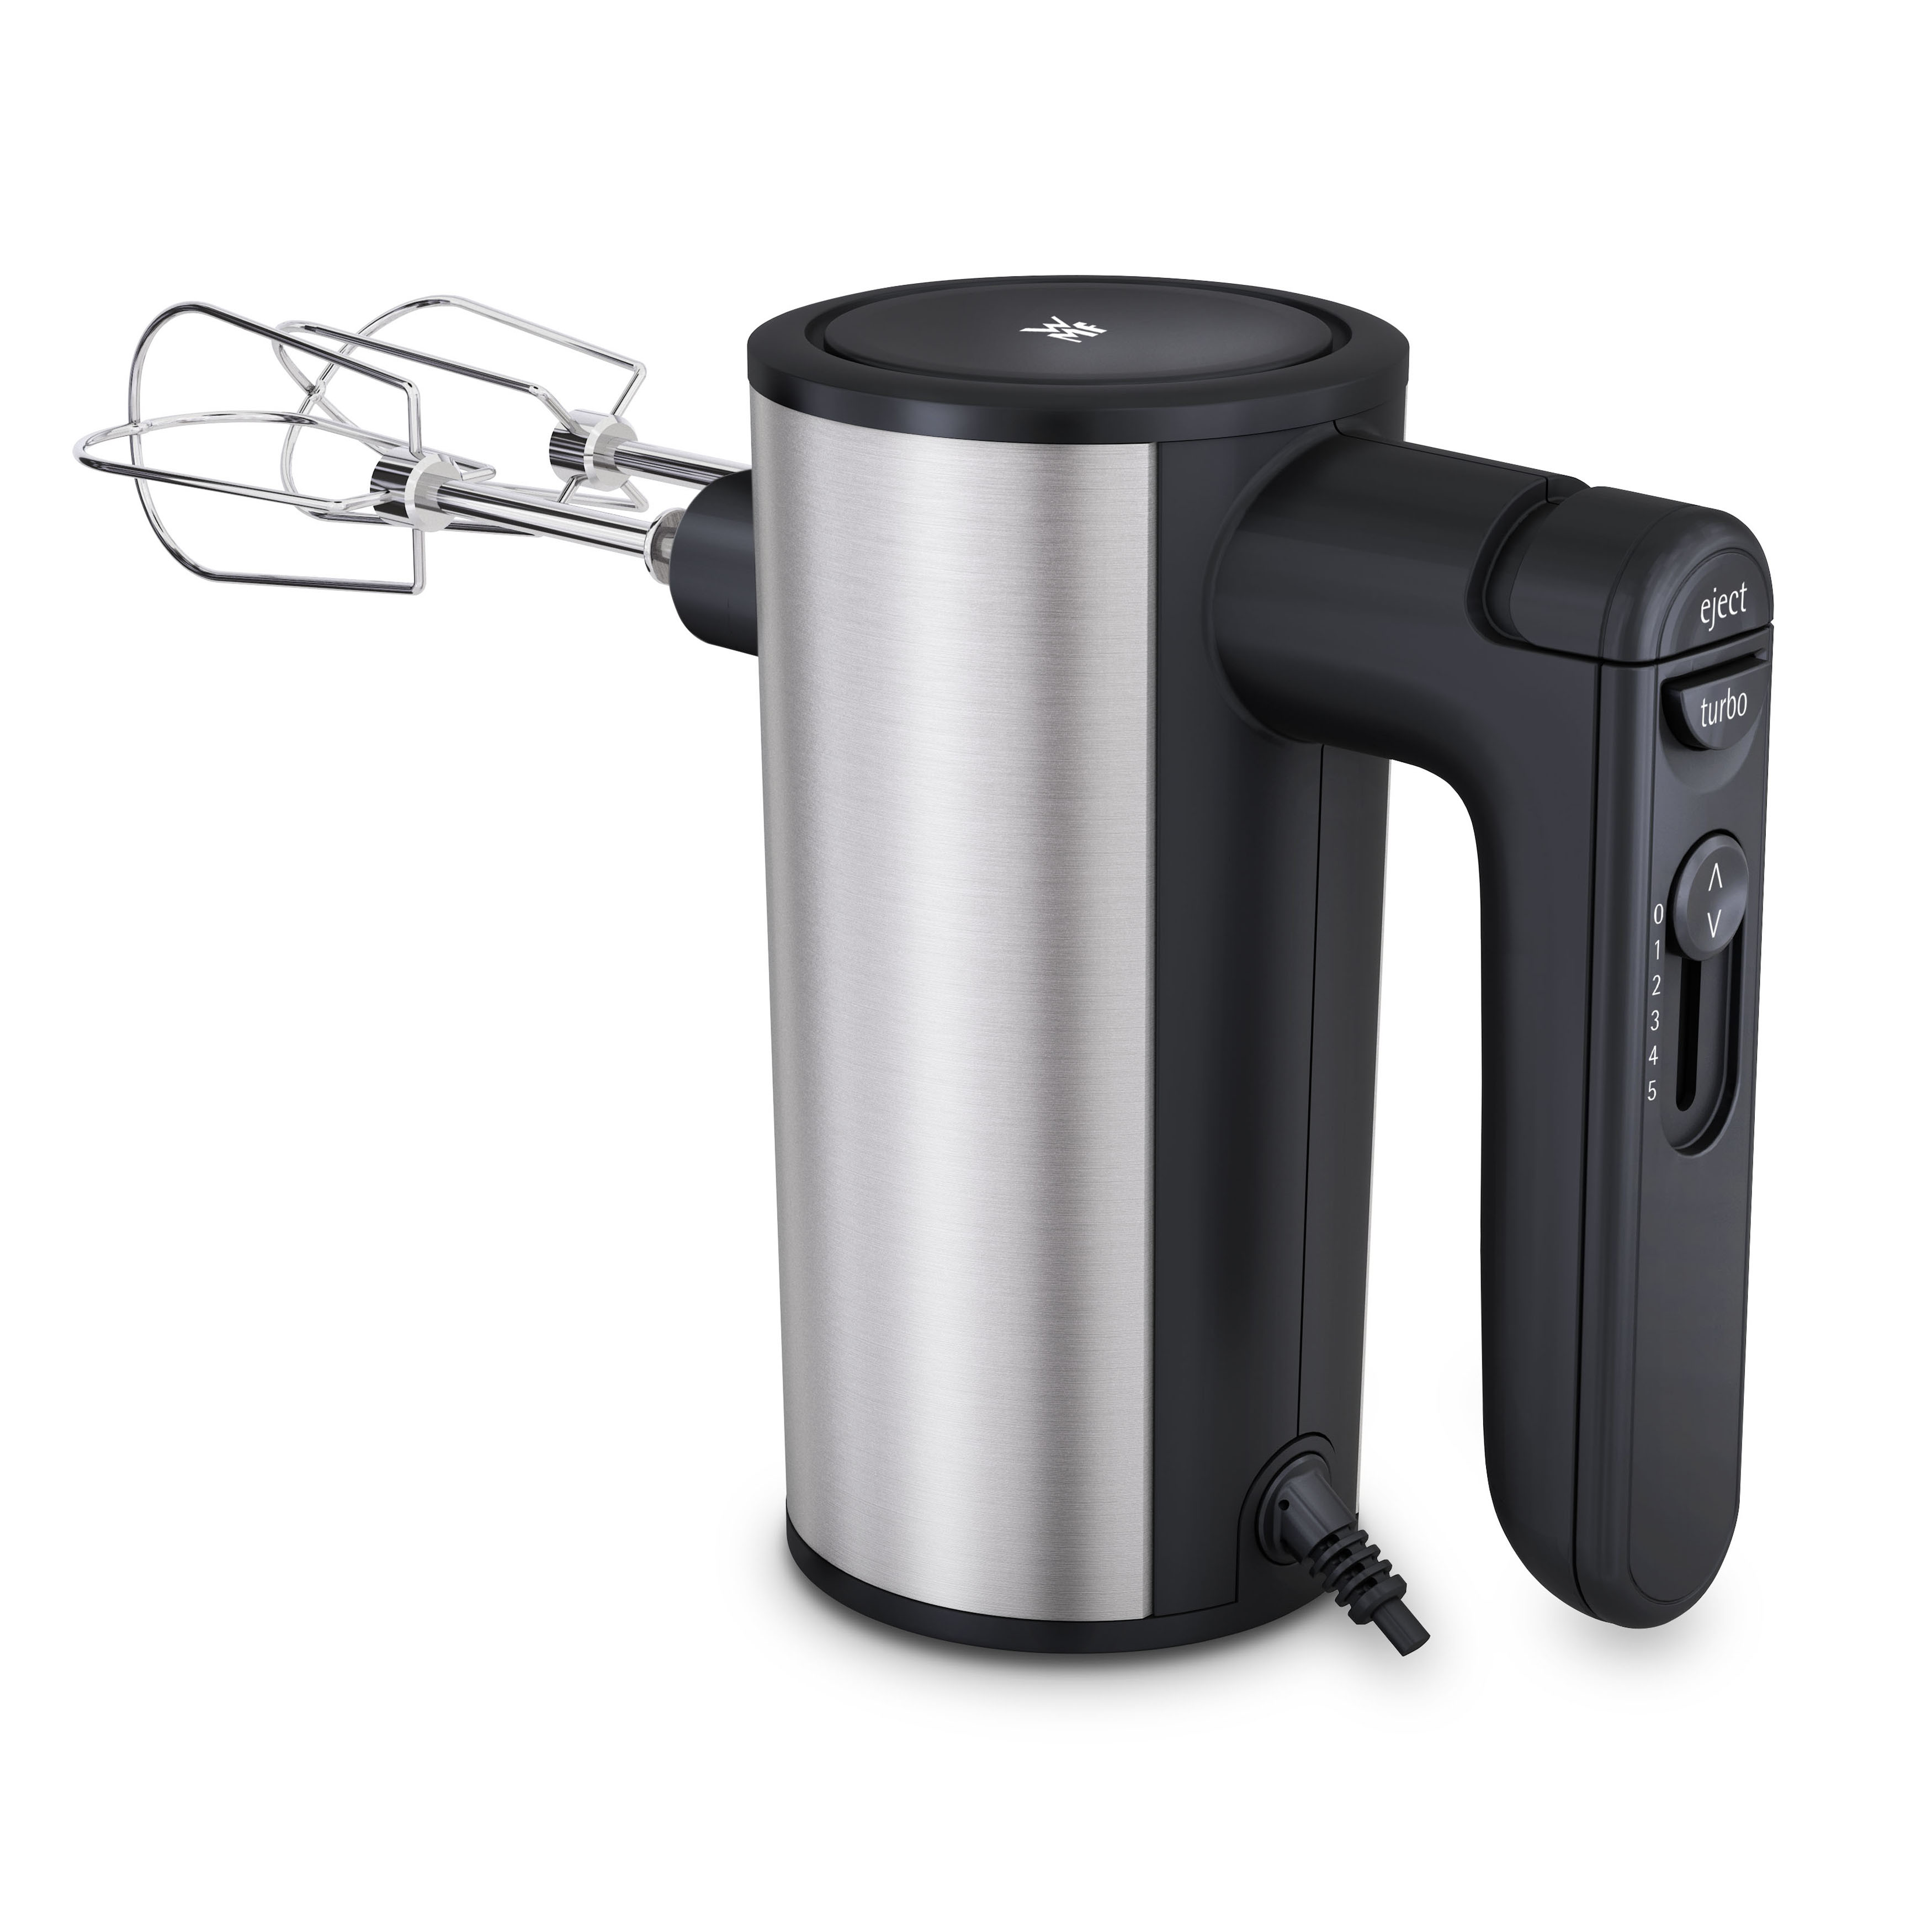 WMF - Kult X Hand Mixer With Whisk/Dough Hooks - Silver/Black (0416560011)